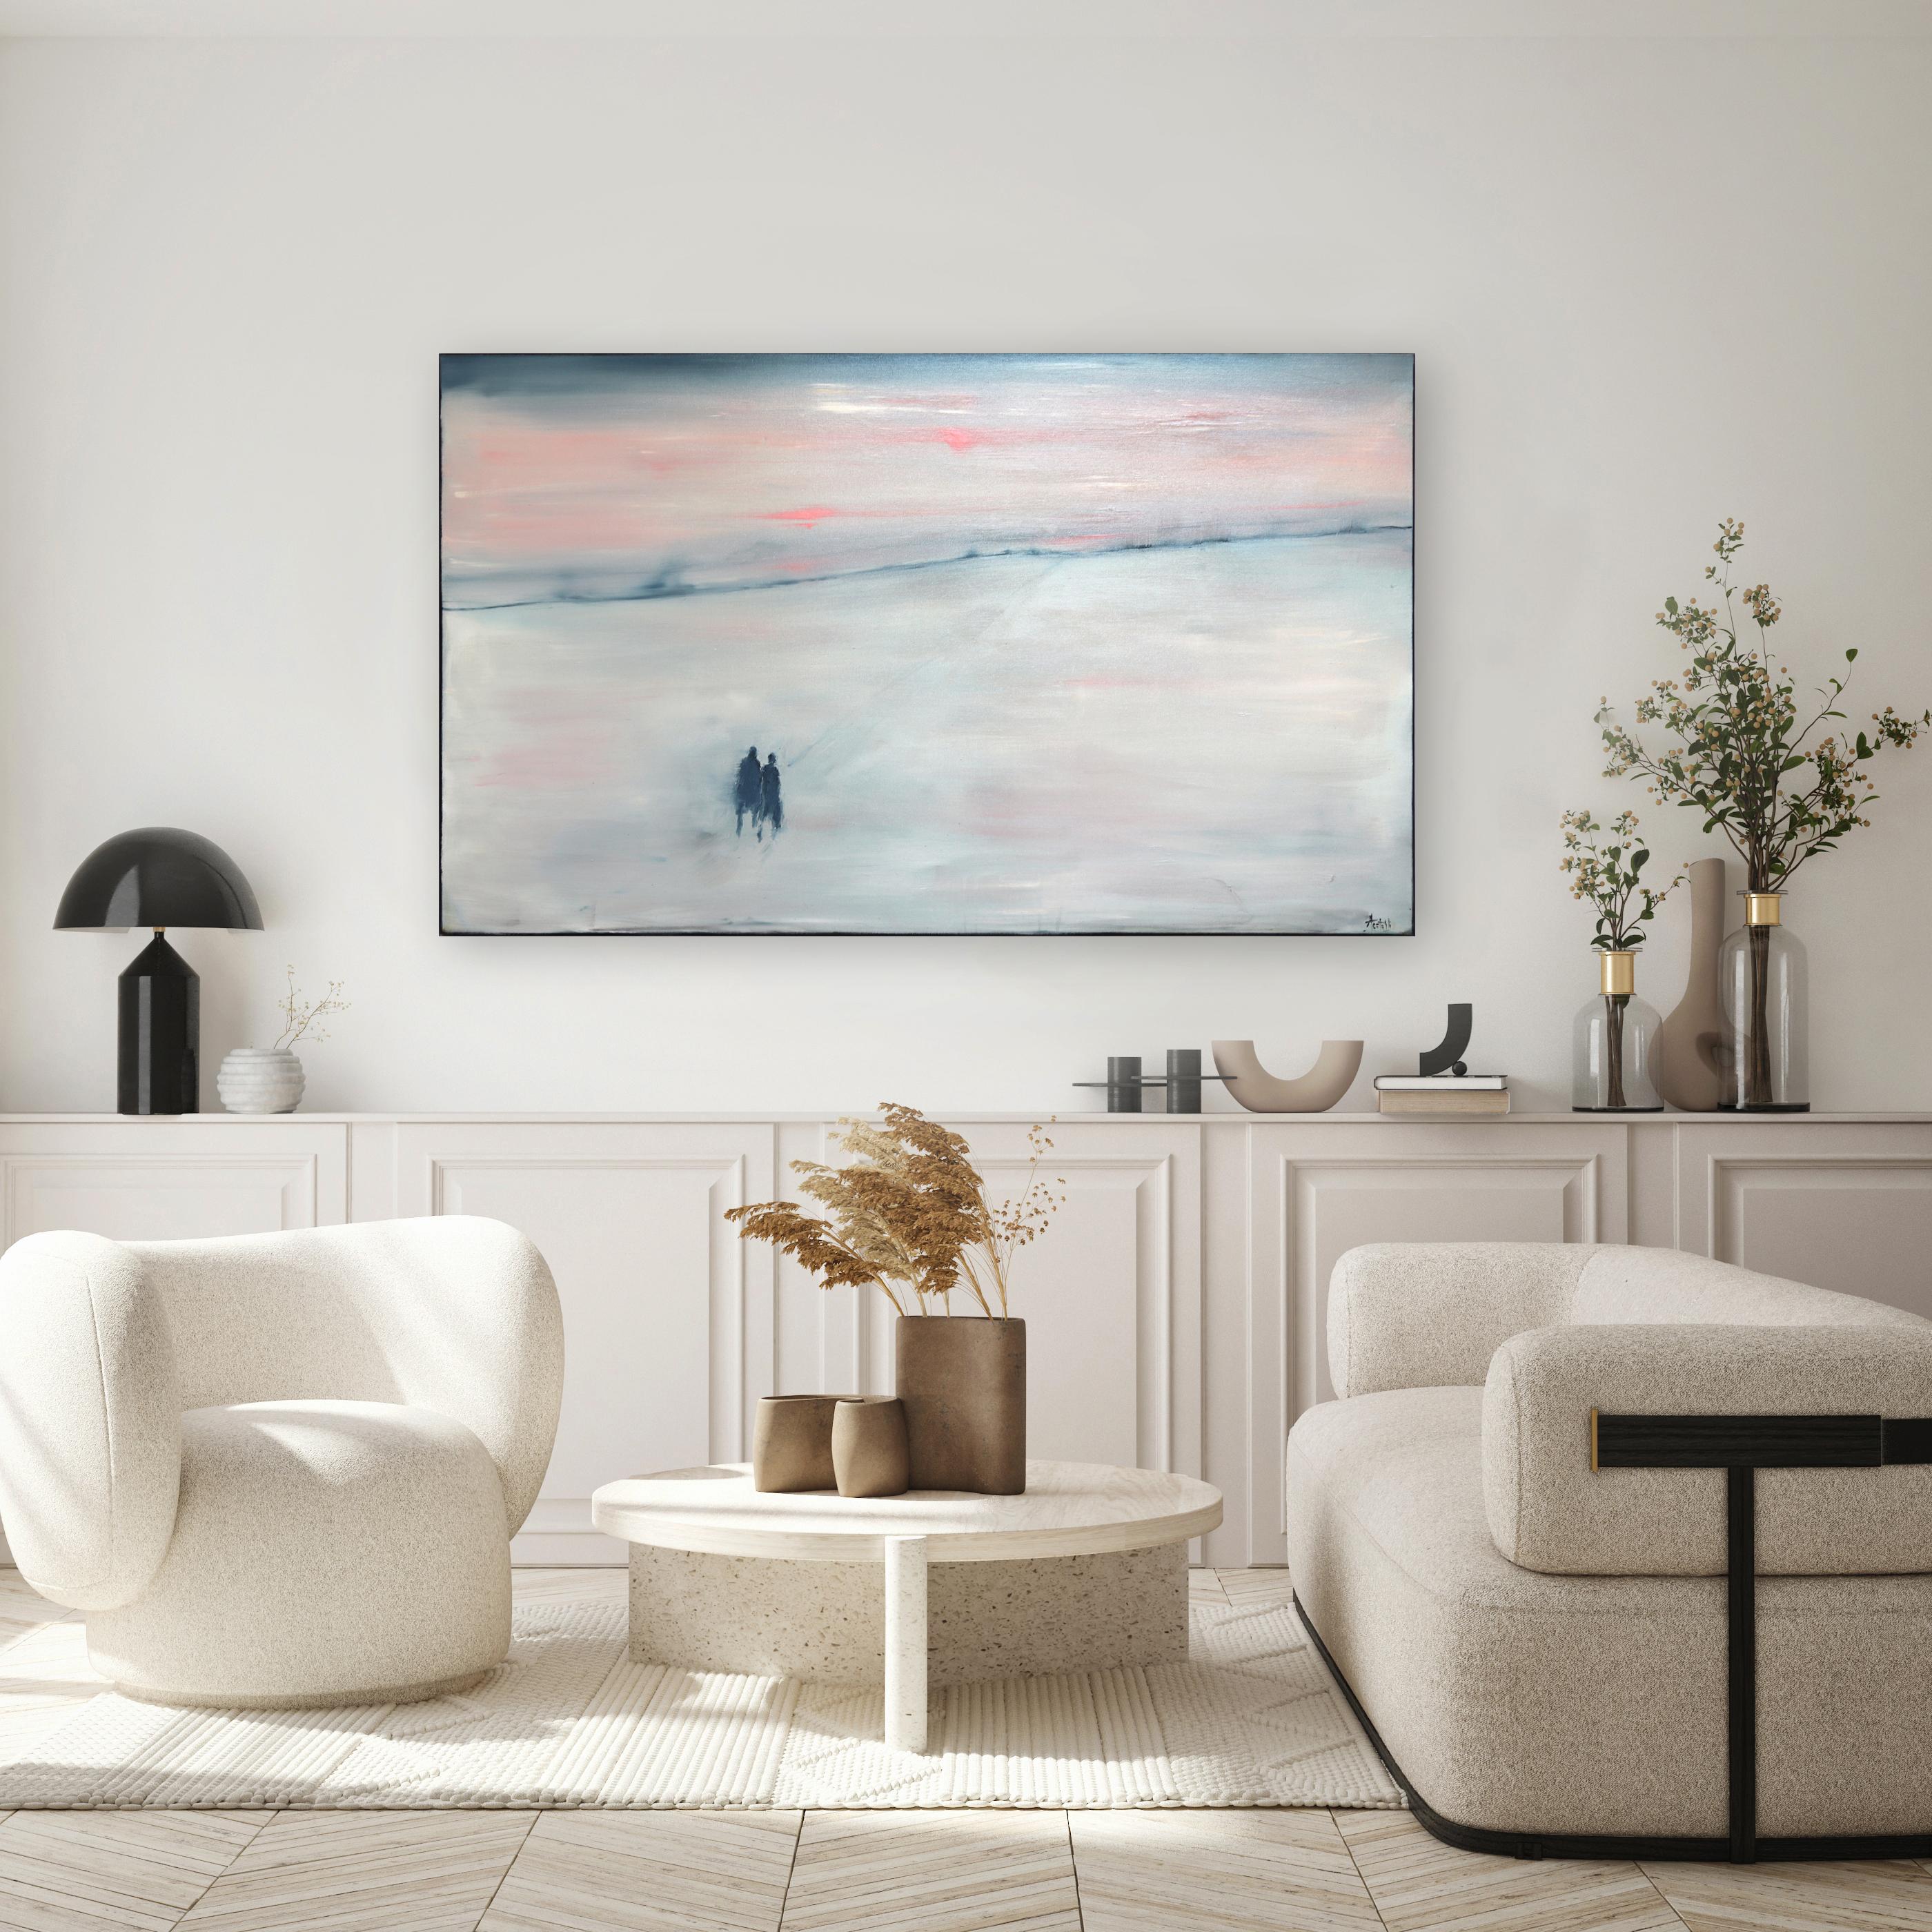 Sojourn of Hope - Large Original Oil on Canvas Abstract Landscape Painting - Contemporary Mixed Media Art by Mark Acetelli